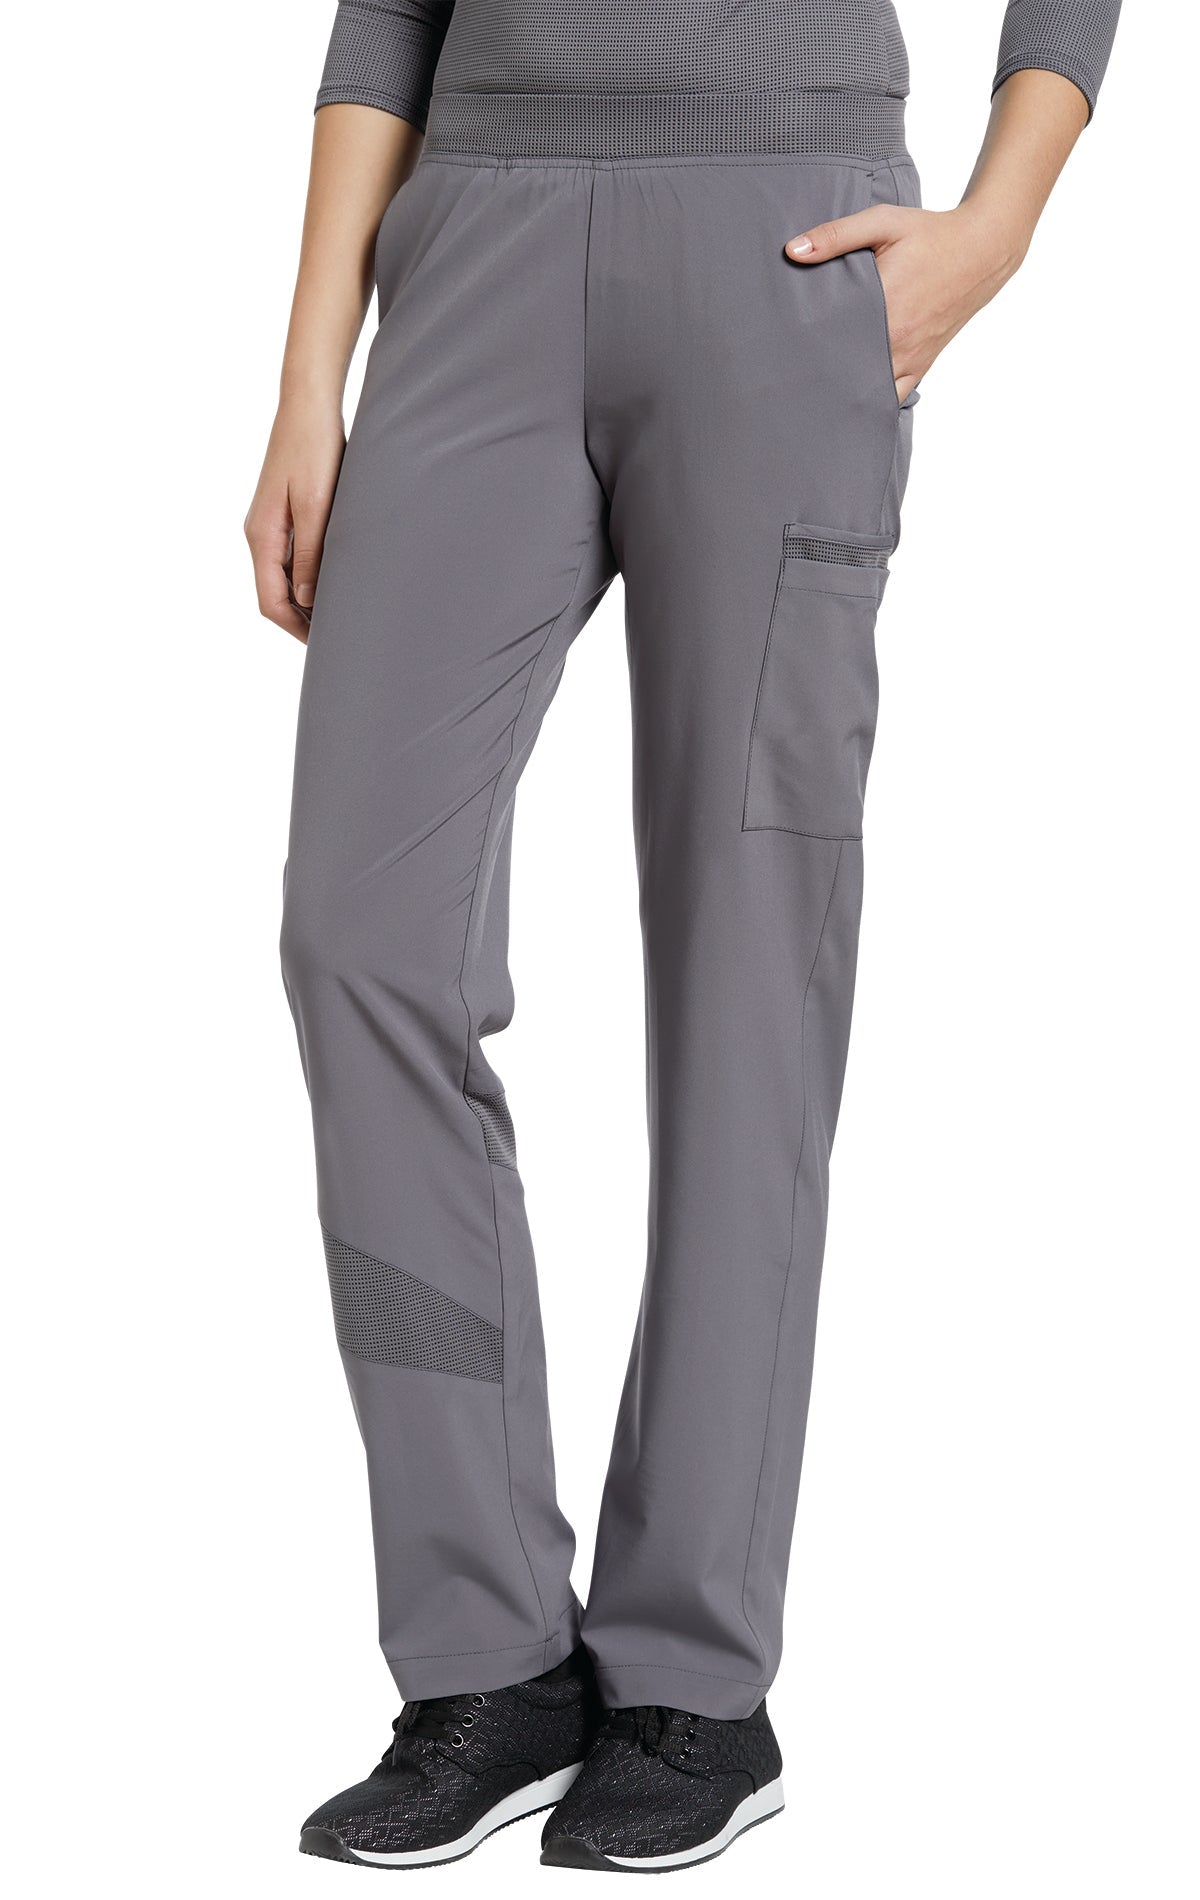 Pewter - White Cross Fit Pull On Cargo Pant